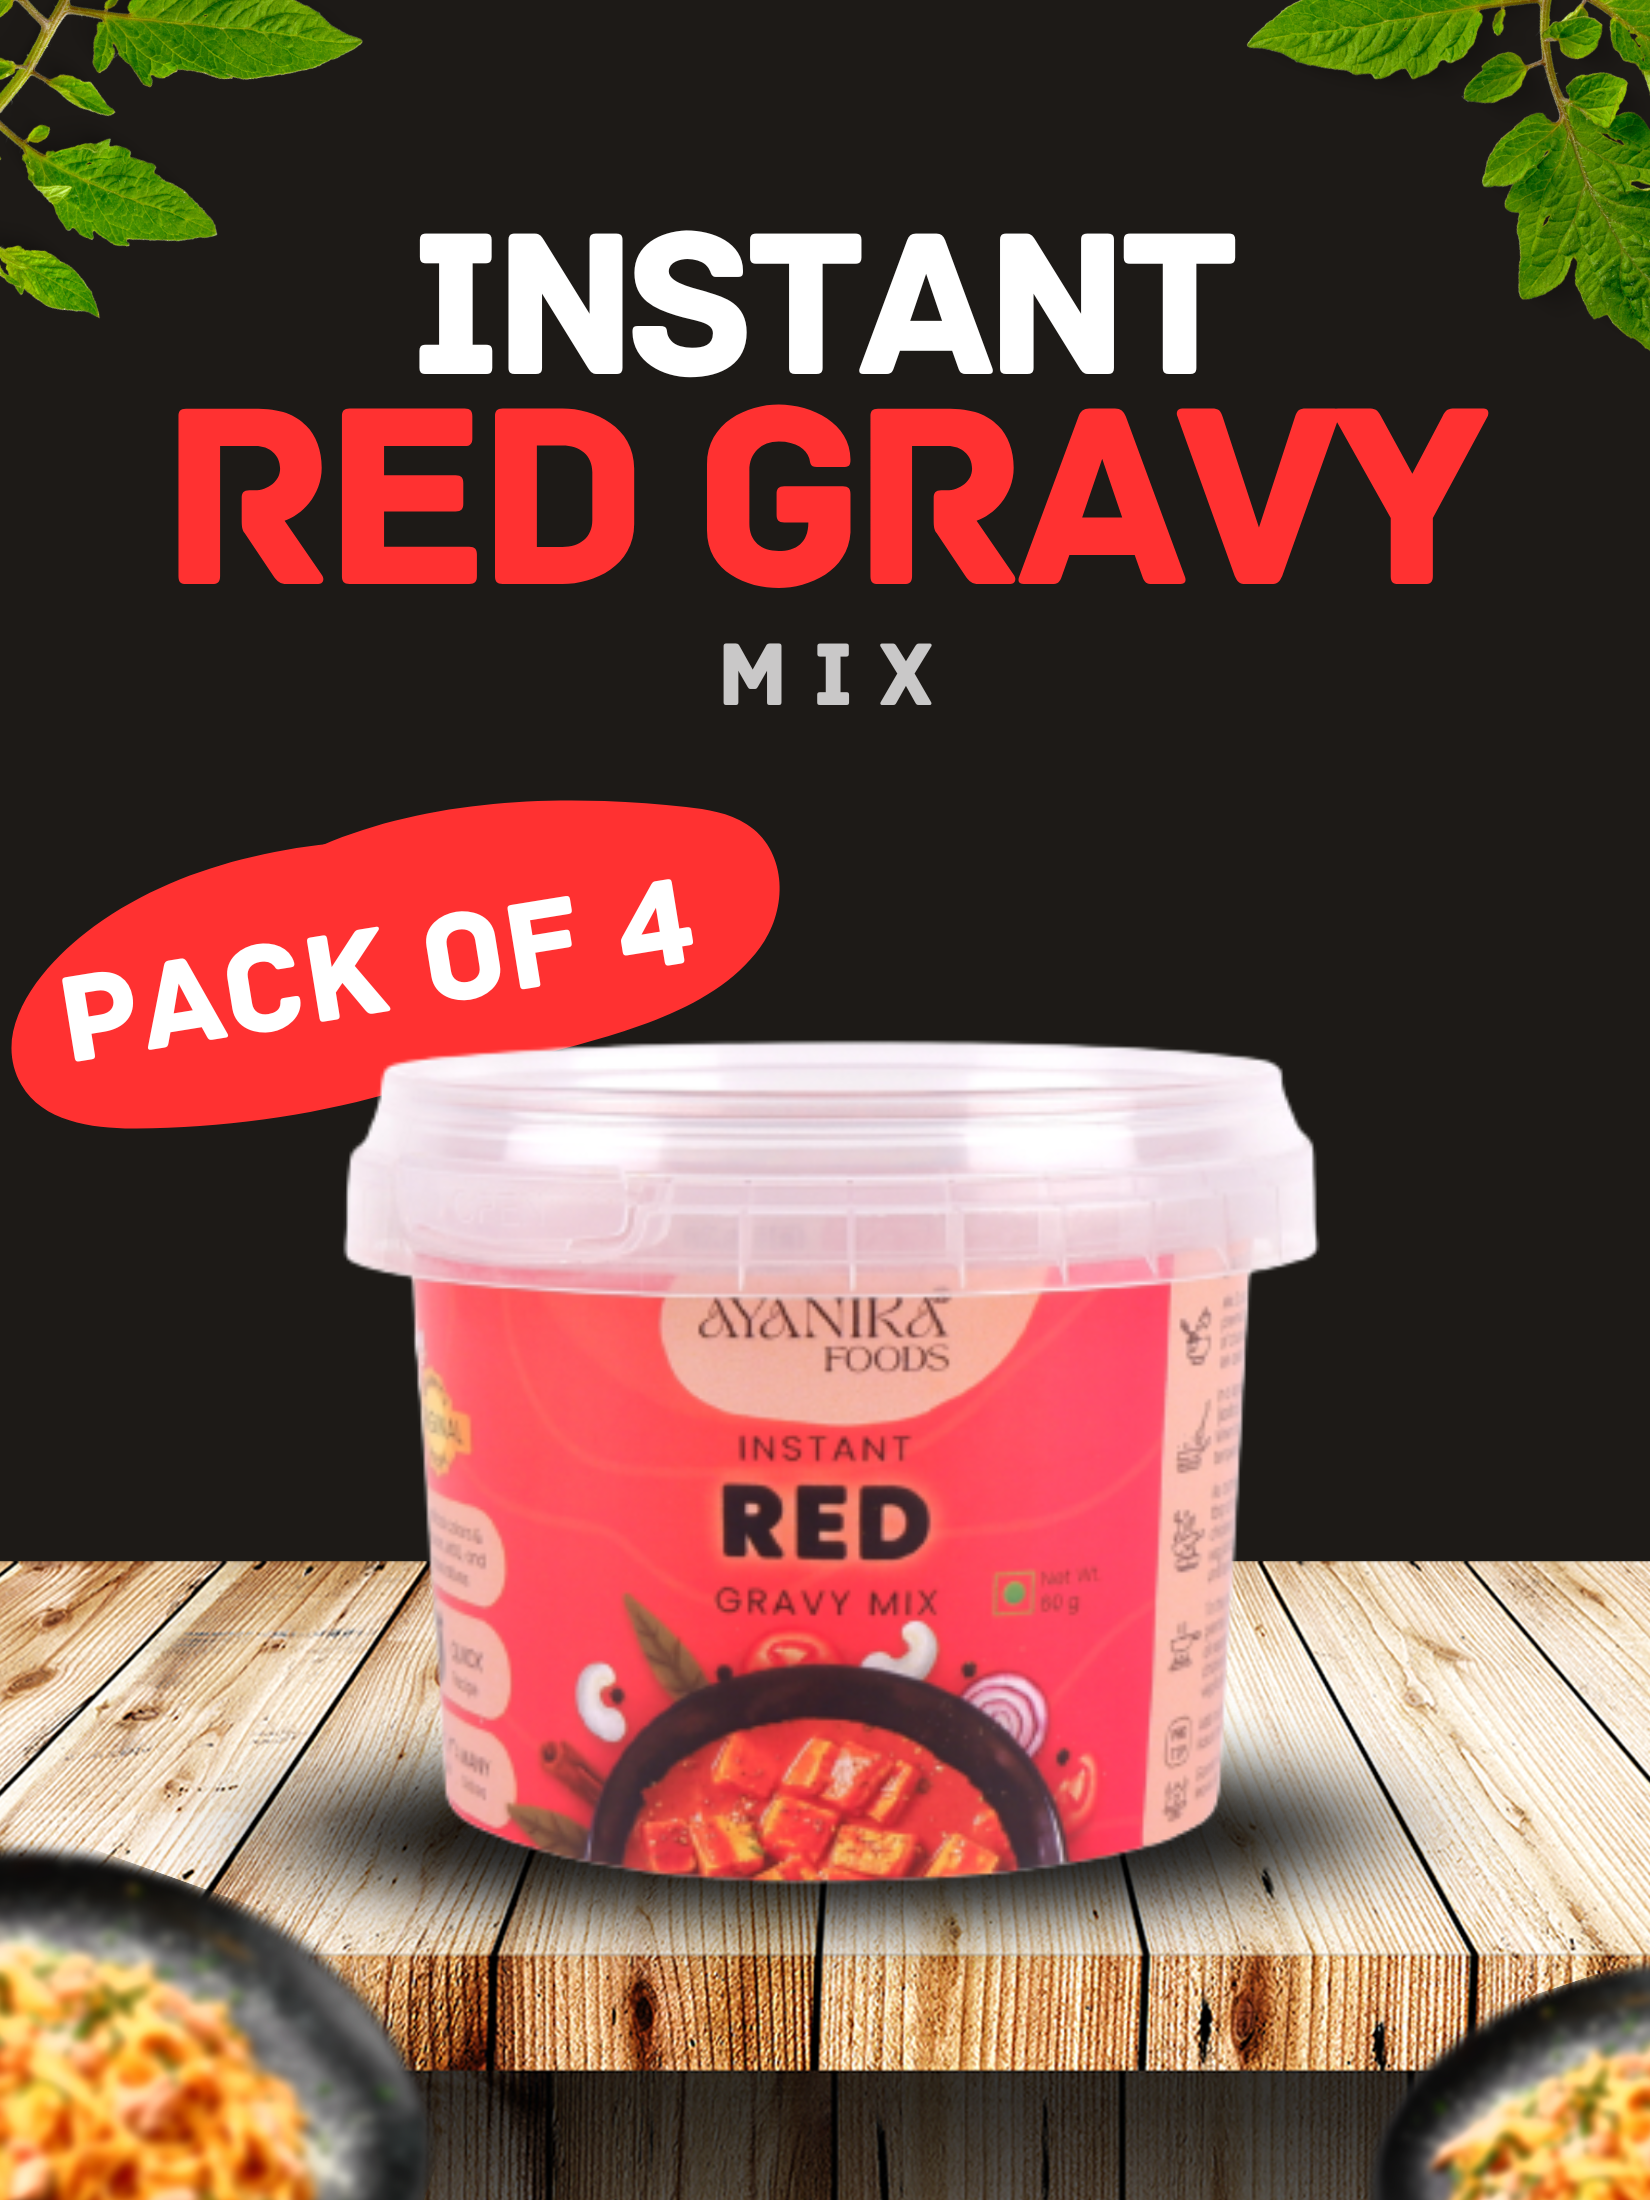 Instant Red Gravy Mix Pack of 4